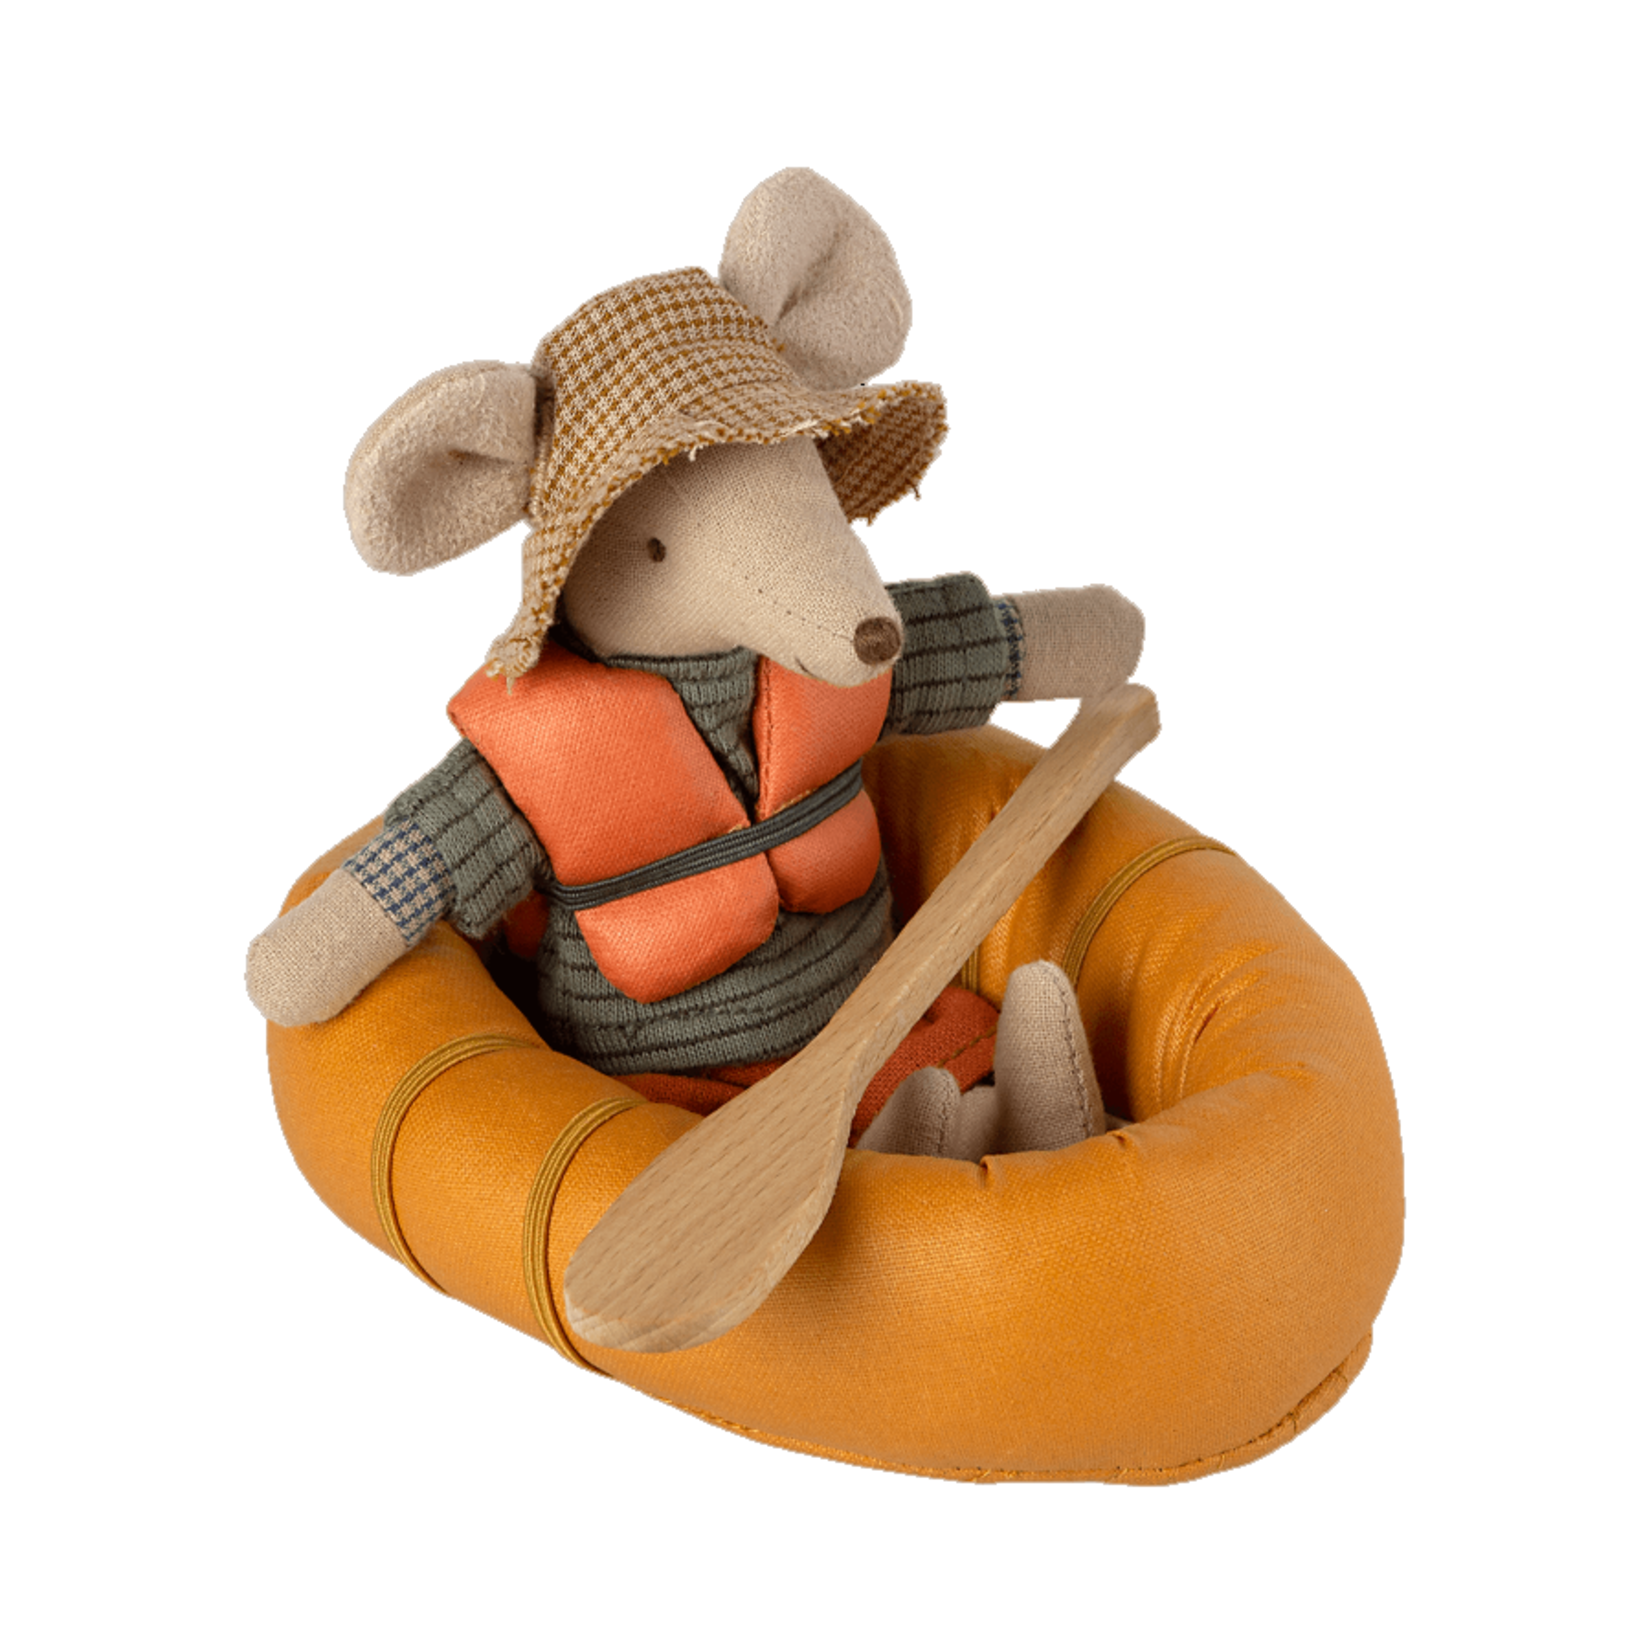 Maileg Maileg Rubber Dinghy boat, Mouse - Dusty yellow NEW